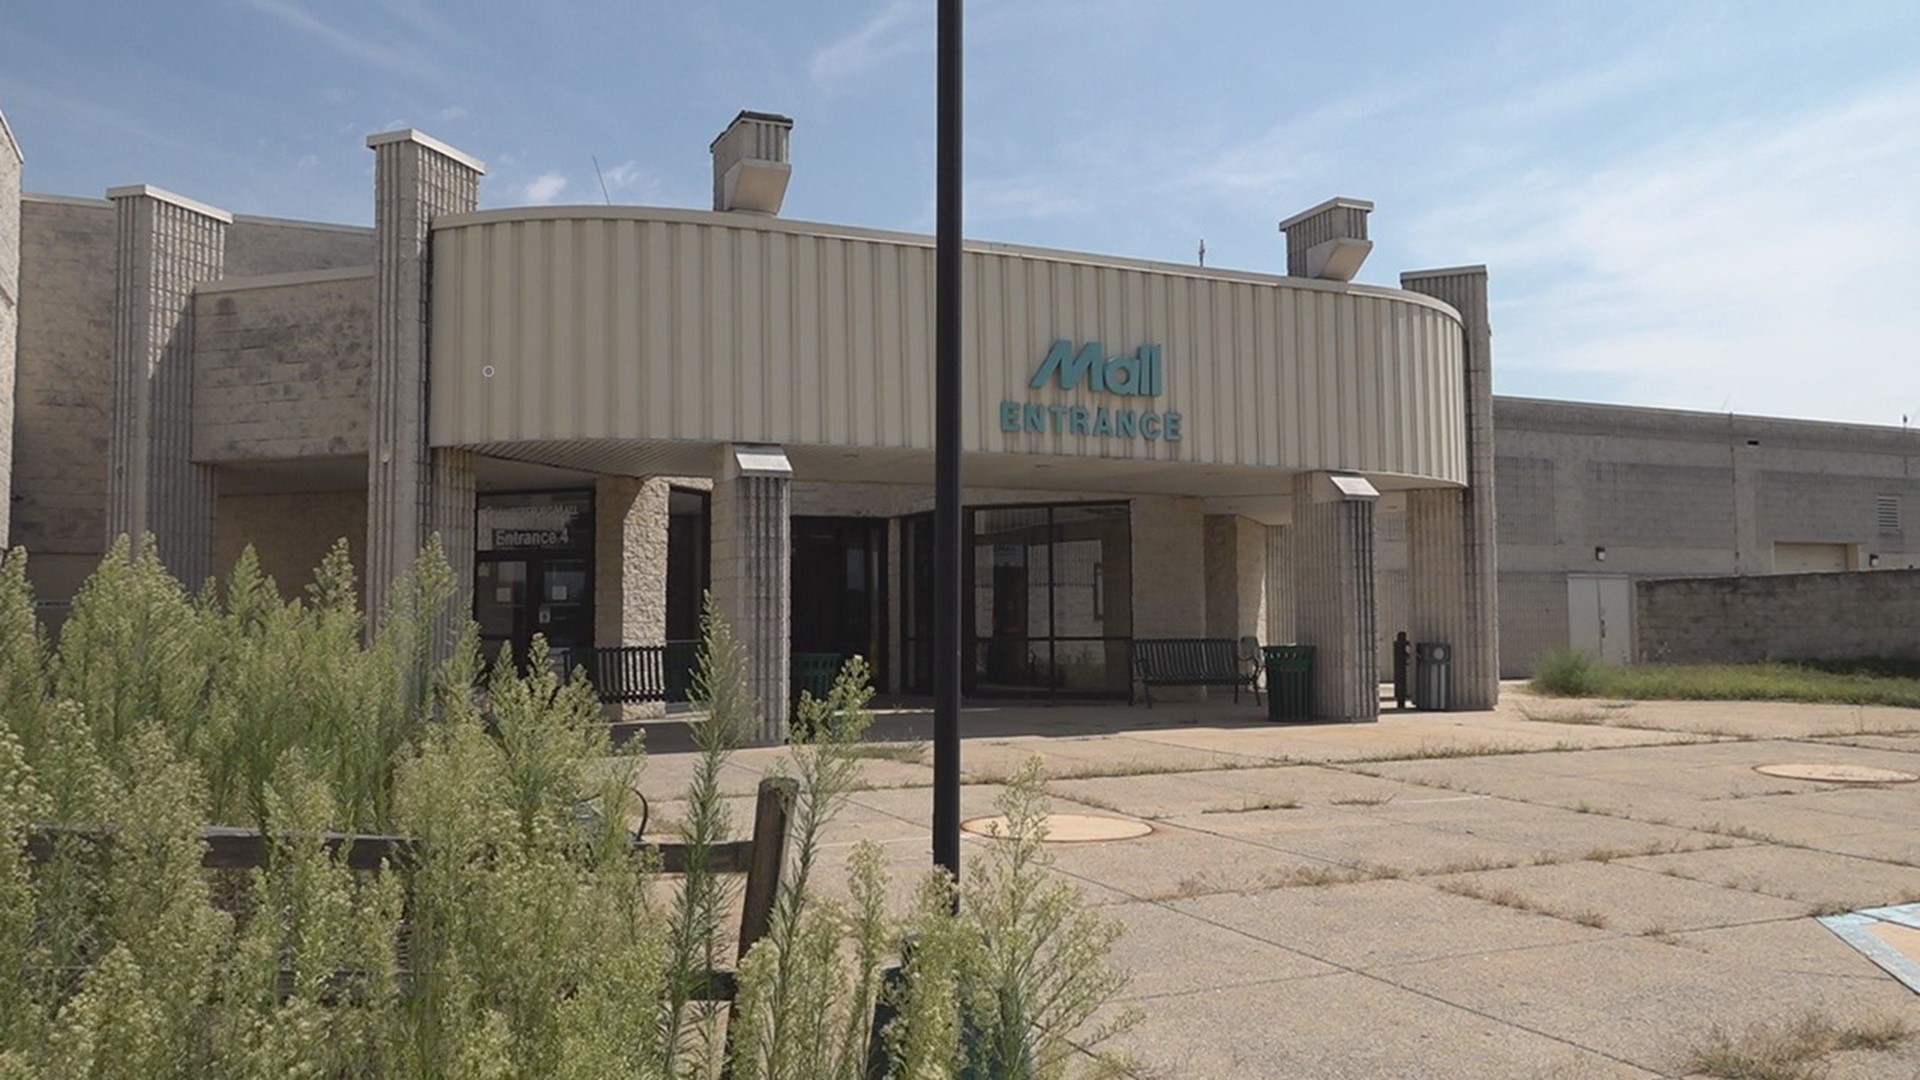 One by one, they're slowly becoming a thing of the past. A Franklin County shopping mall shut down this summer after more than 40 years of retail sales.